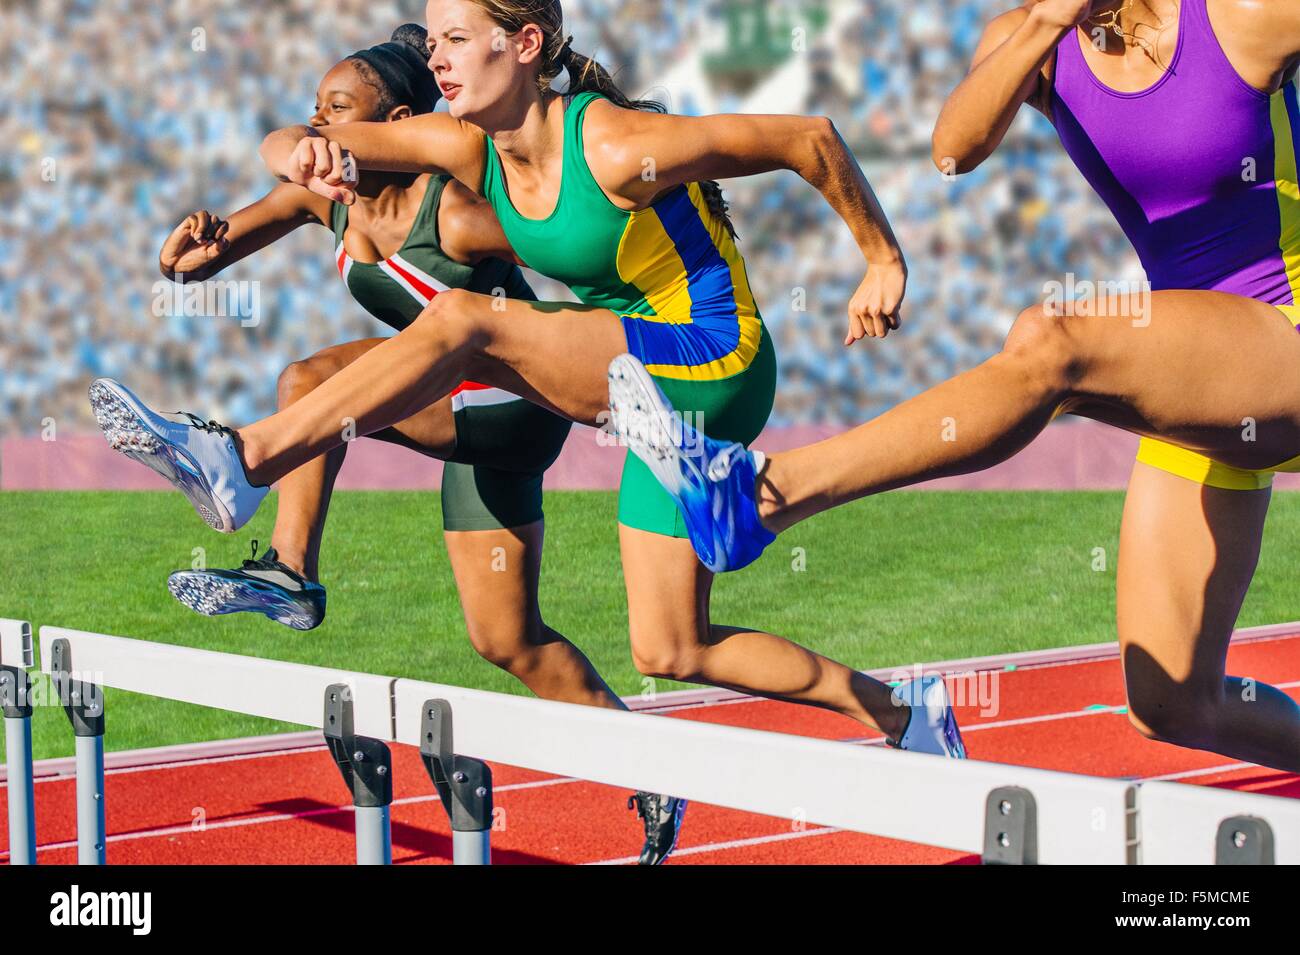 Runners jumping over hurdle on track Stock Photo